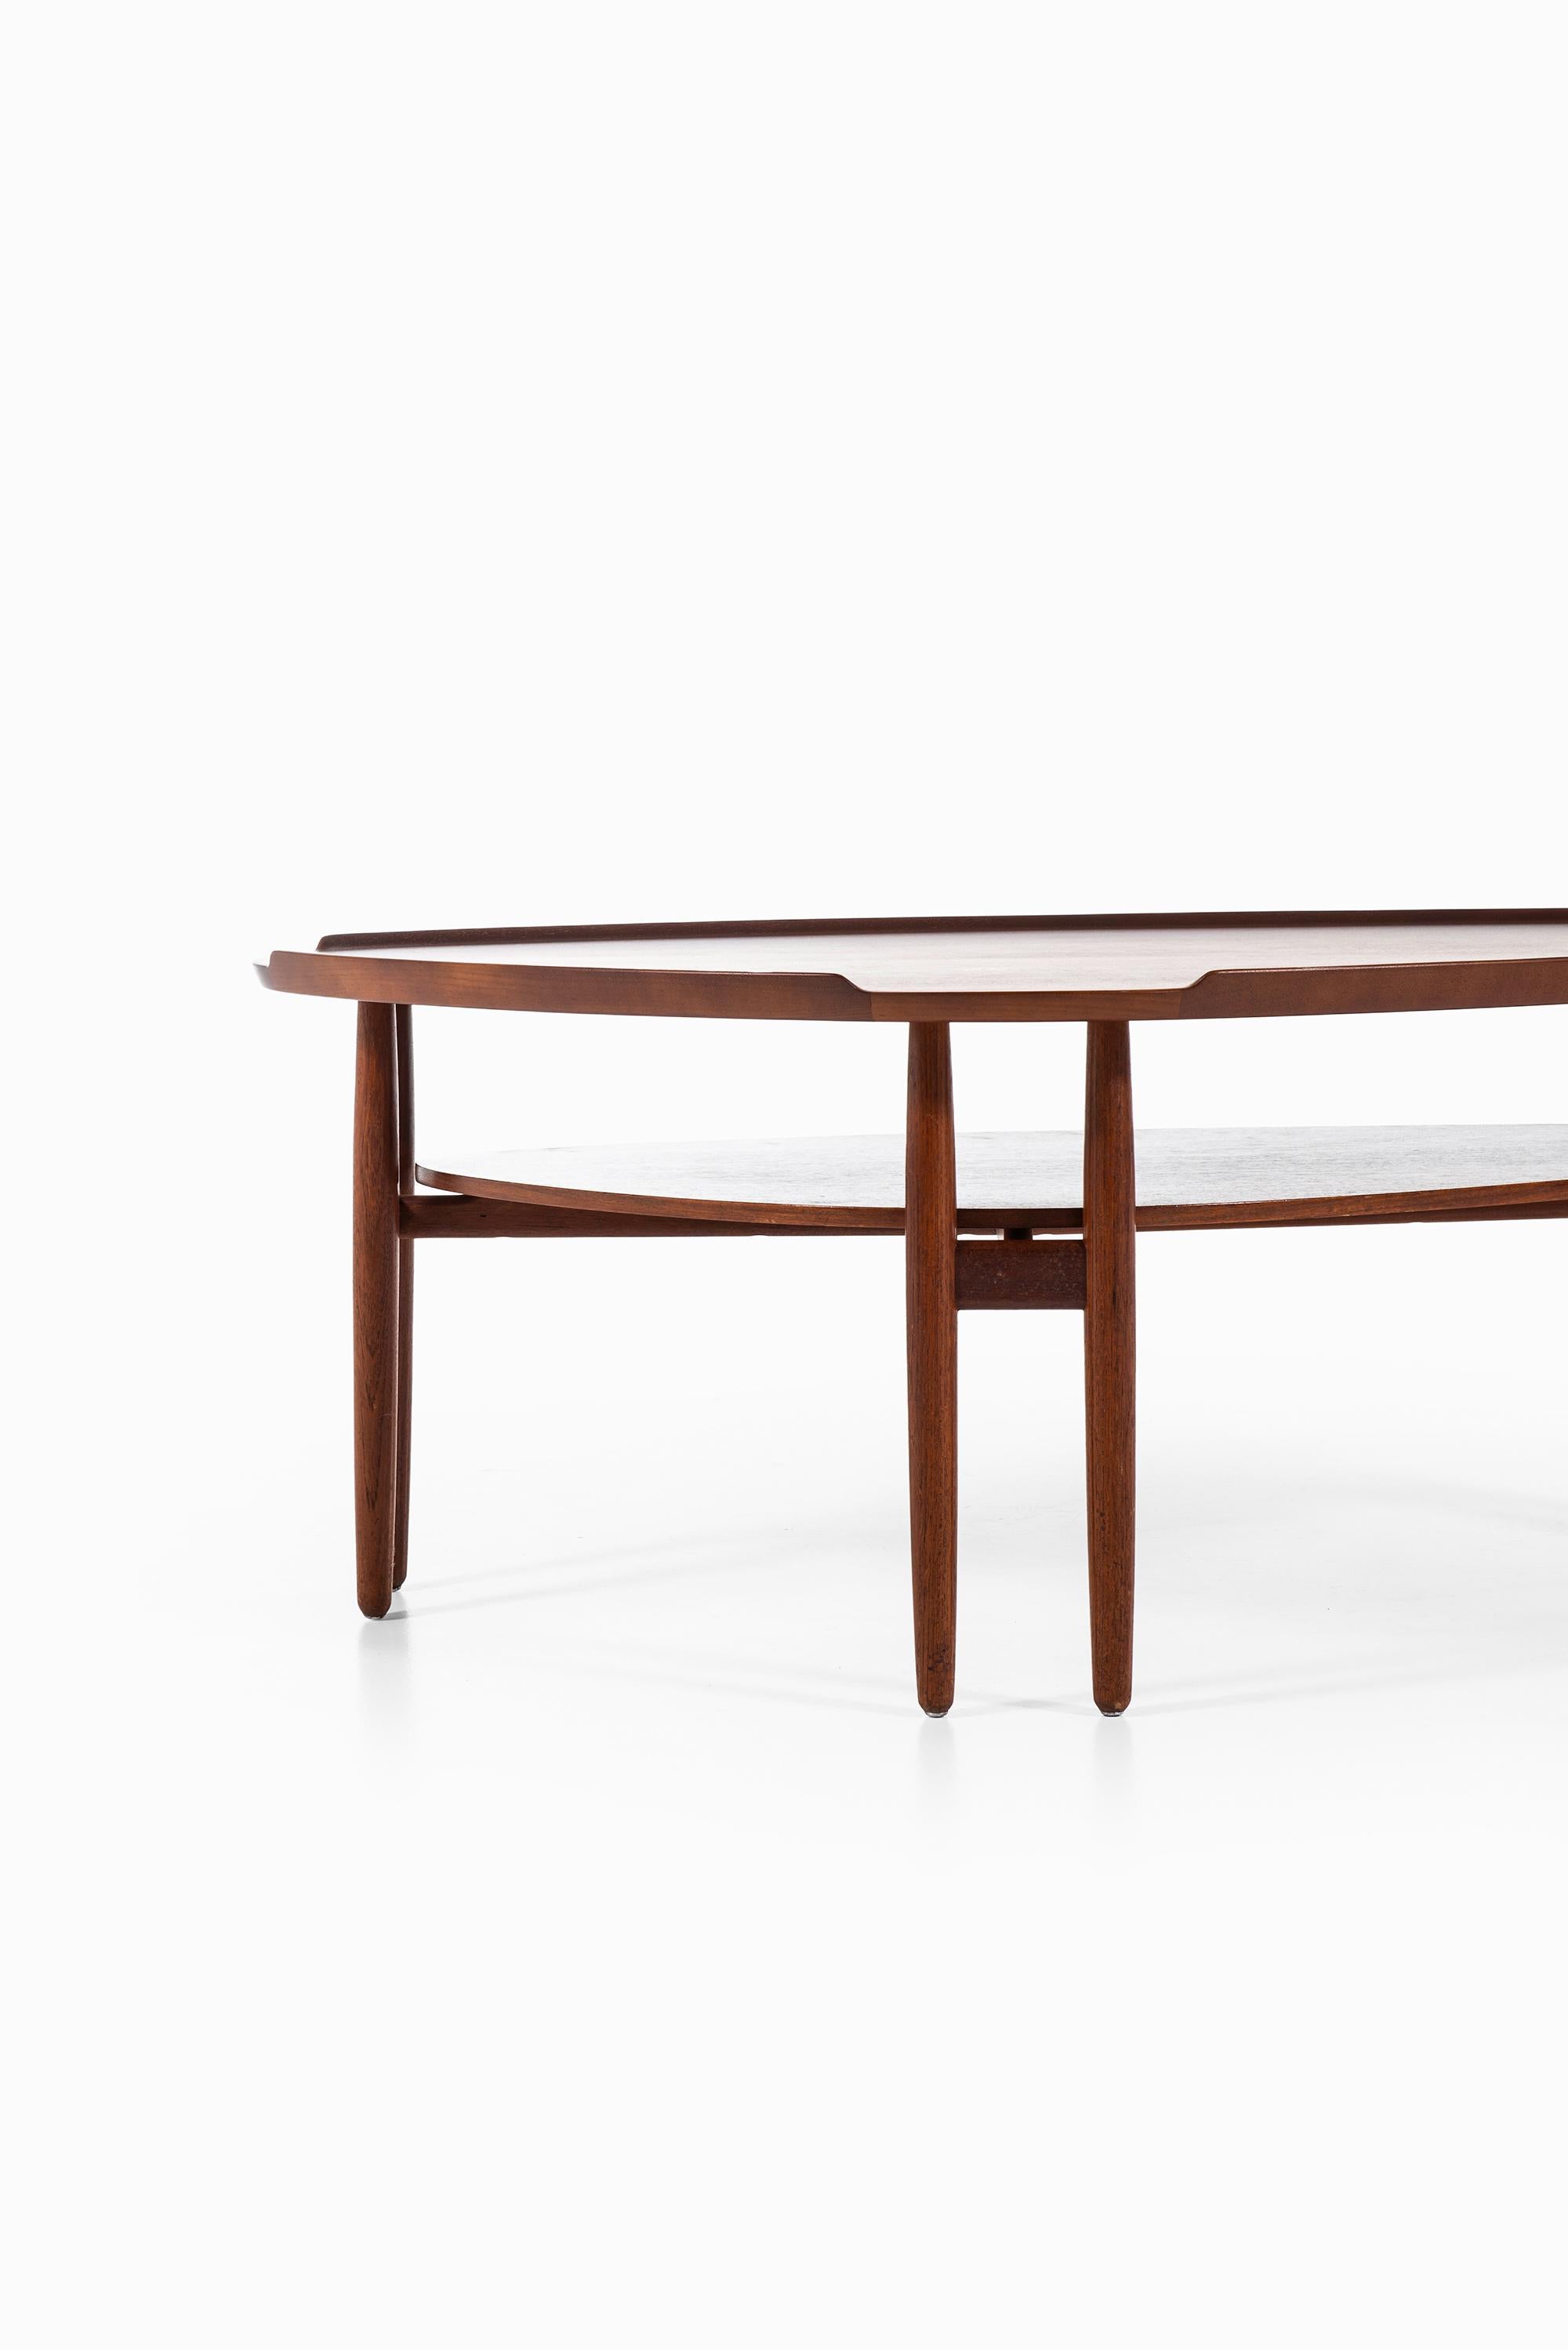 Rare coffee table designed by Arne Vodder. Produced in Denmark.